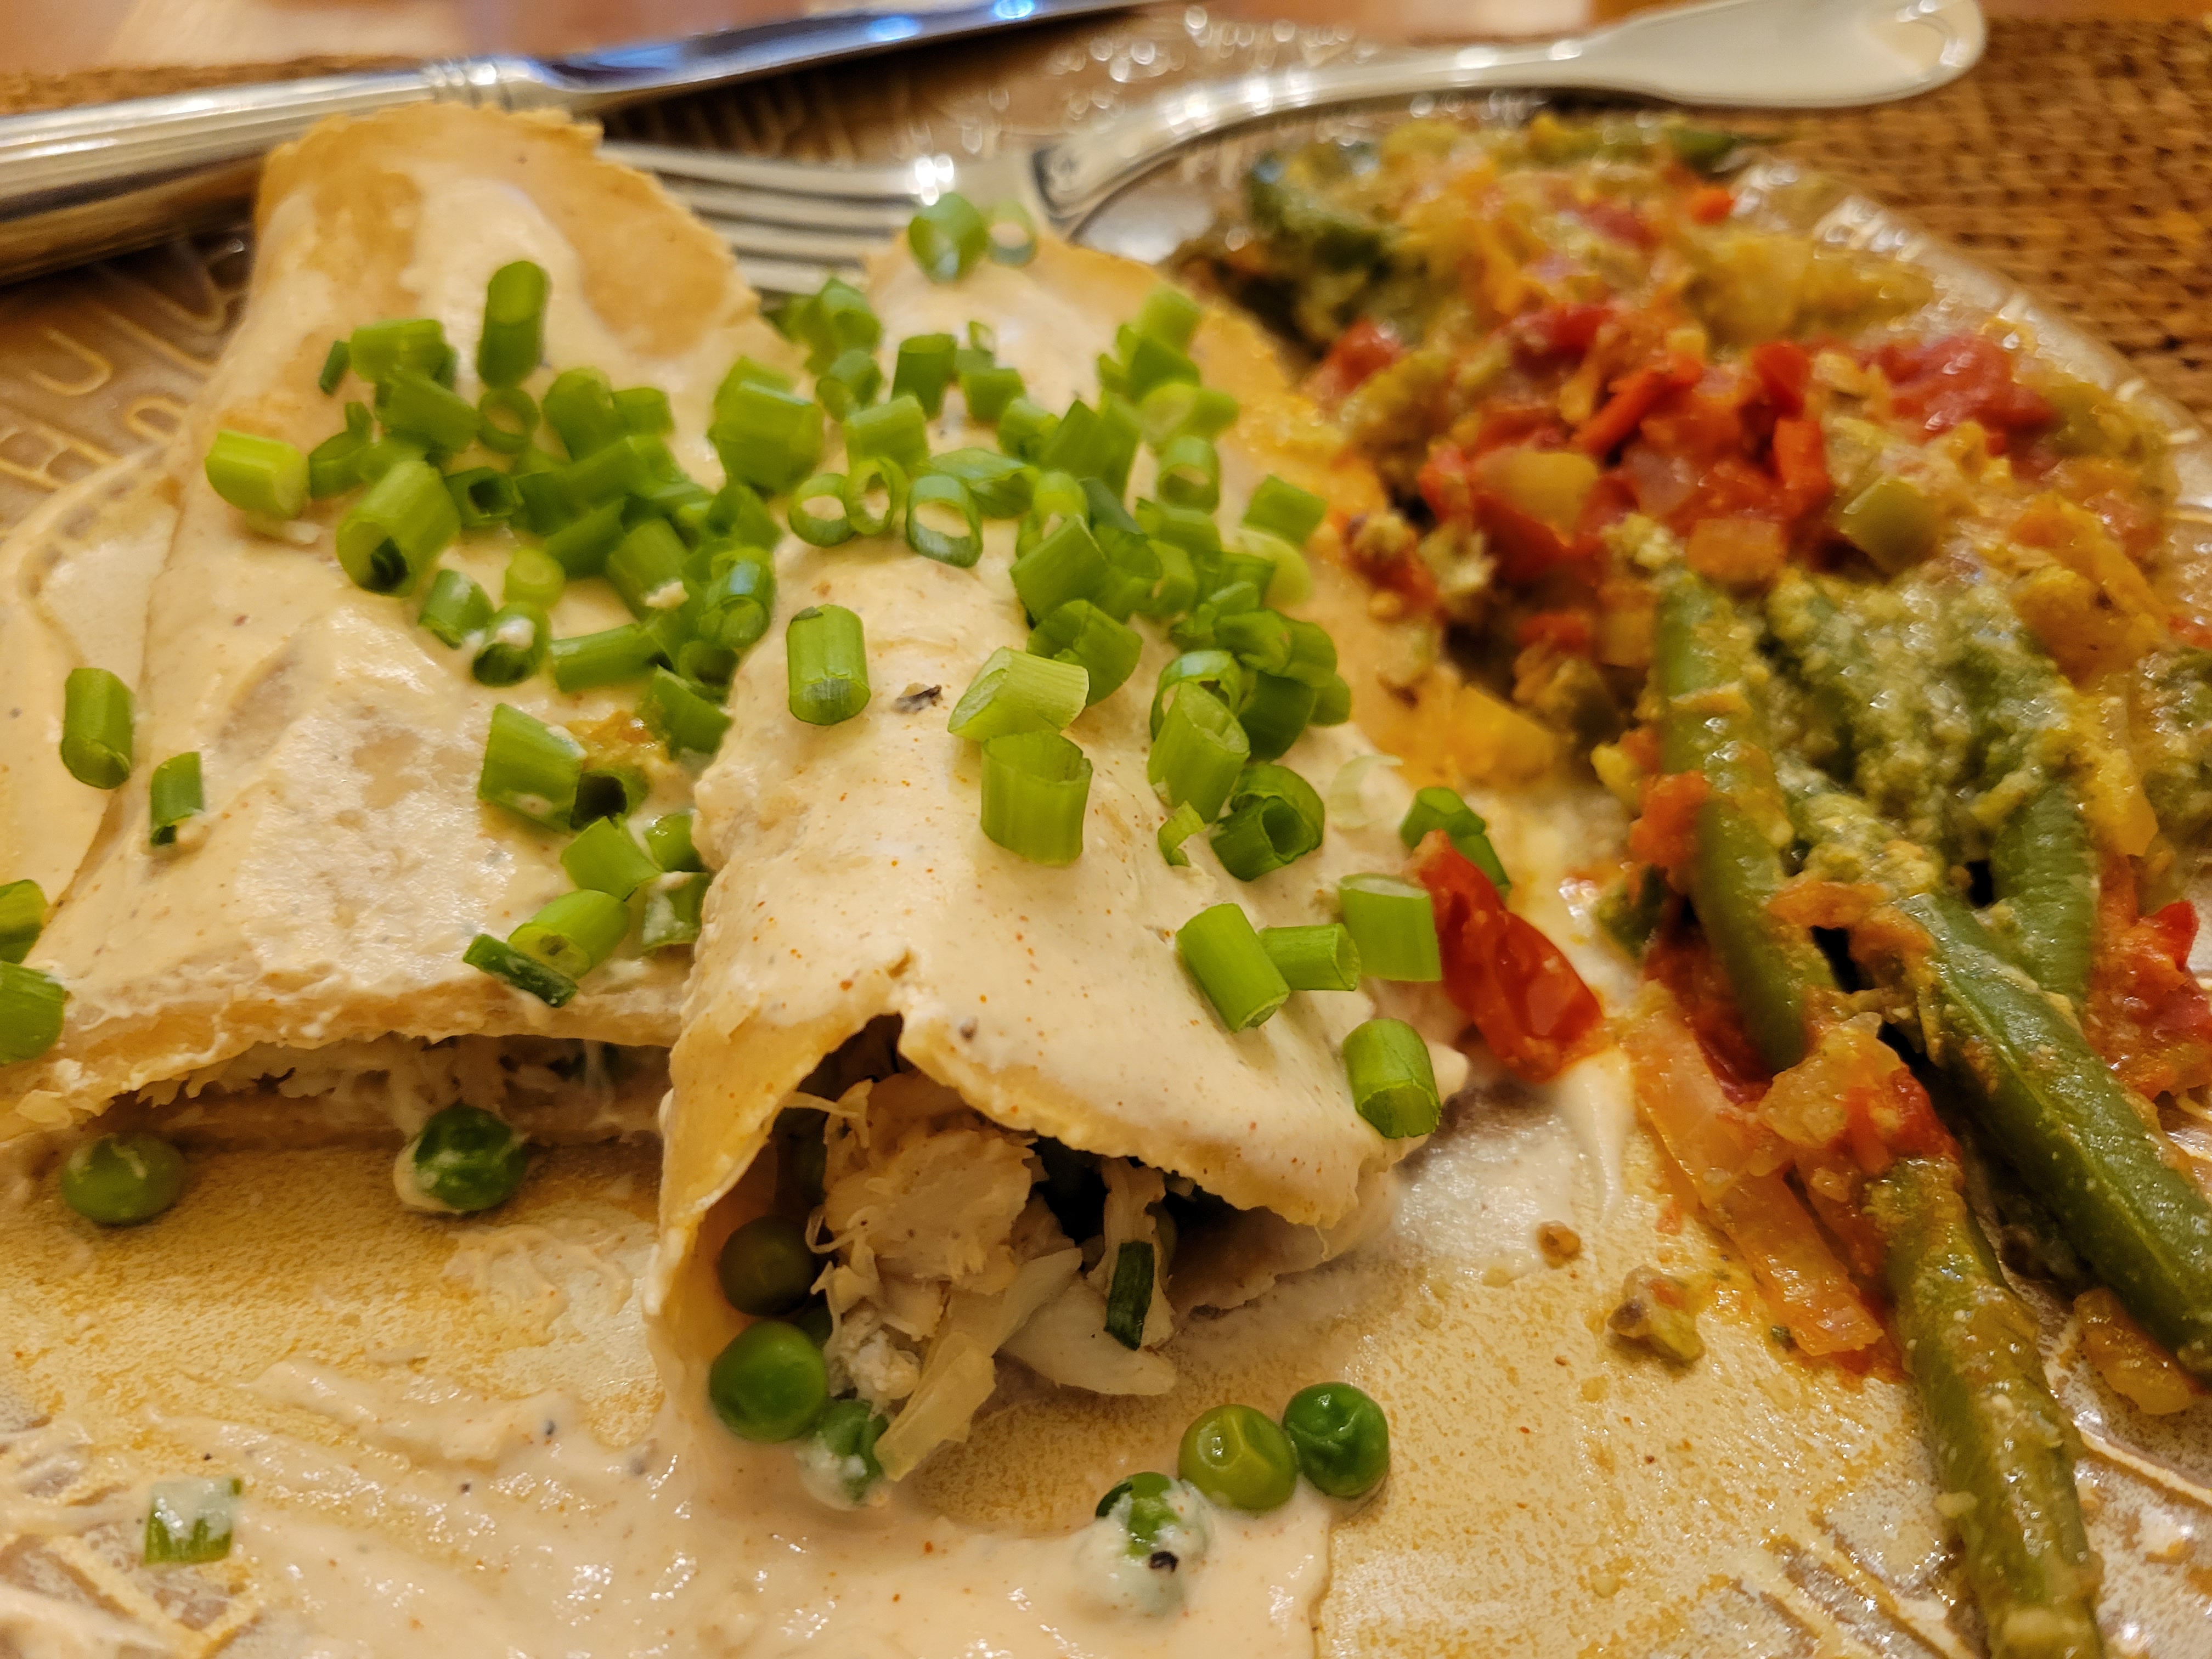 plate of thanksgiving food, including two enchiladas in a cream sauce with green onions and green beans with tomato salsa